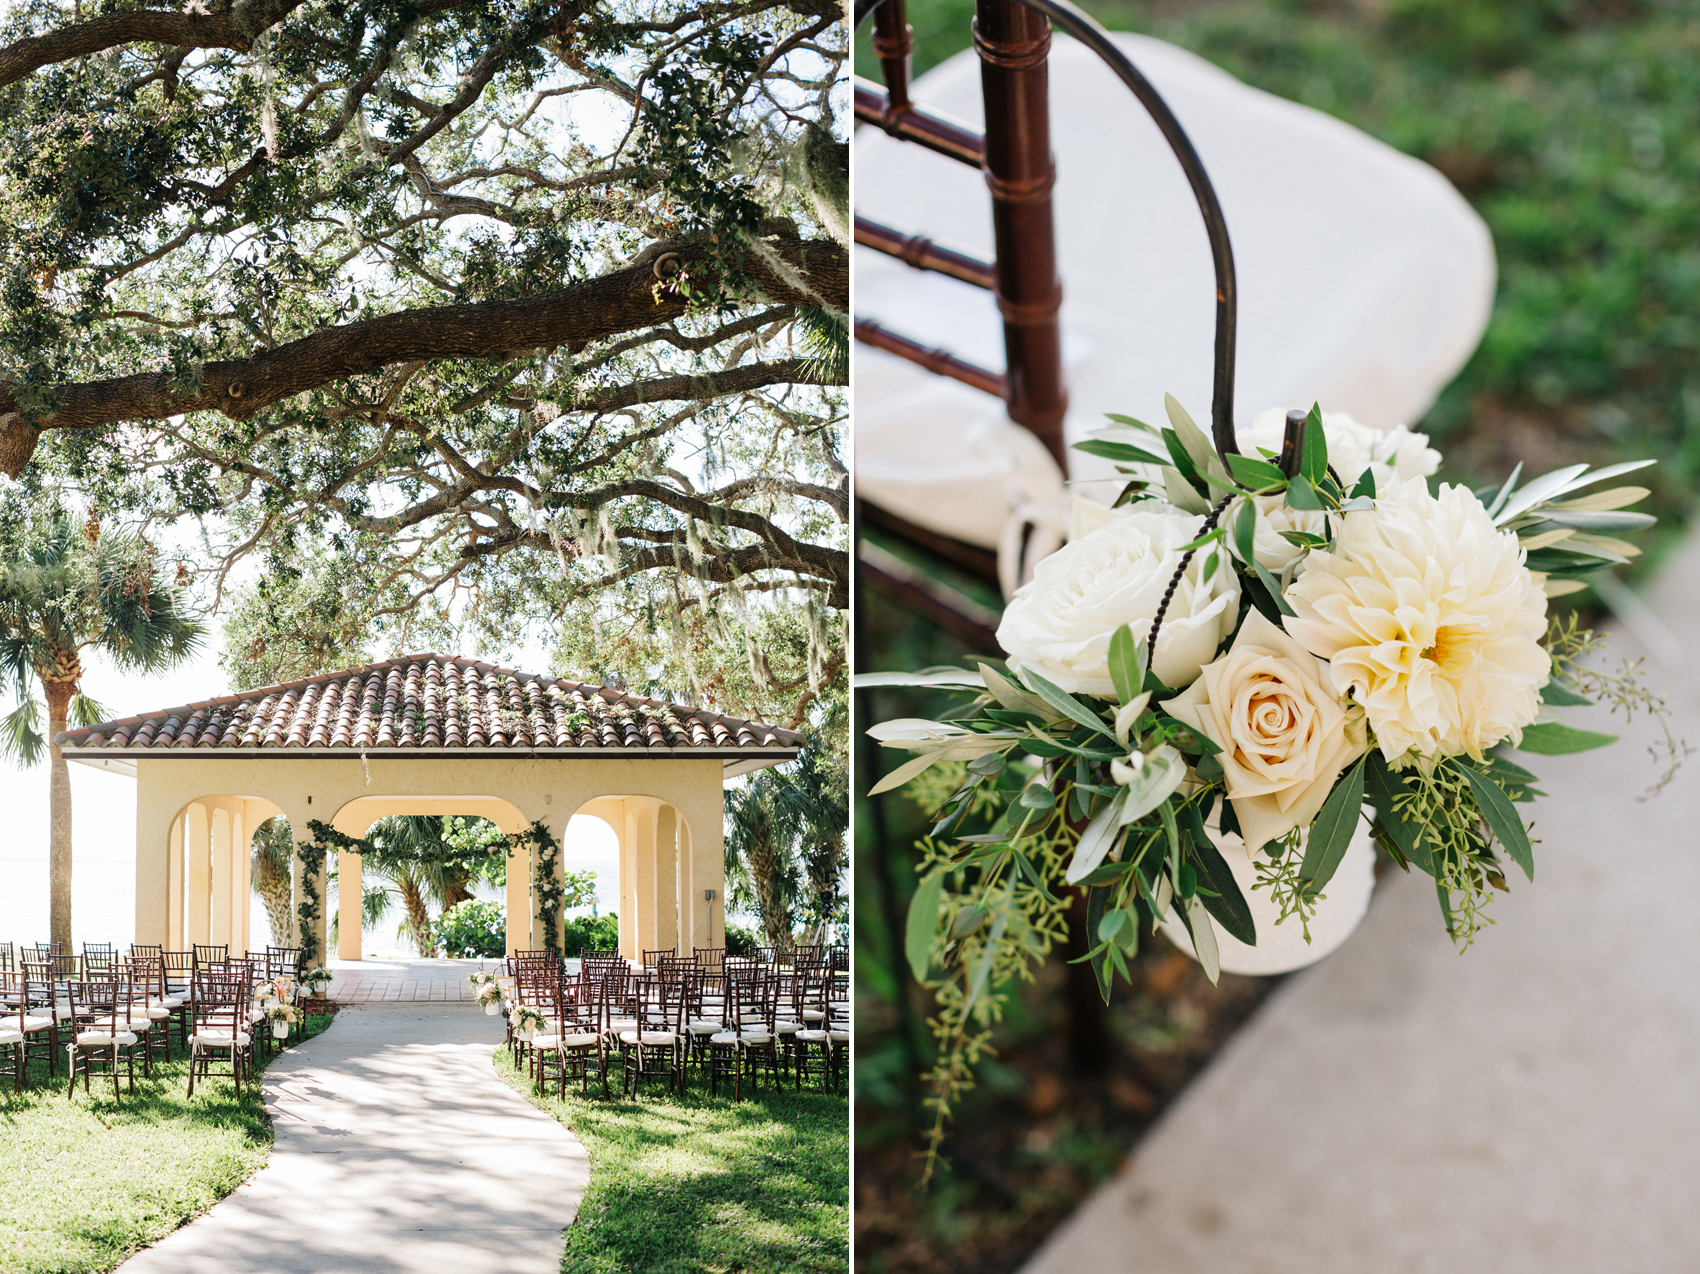 Lush garden wedding ceremony at the Powel Crosley Estate in Sarasota with waterfront views